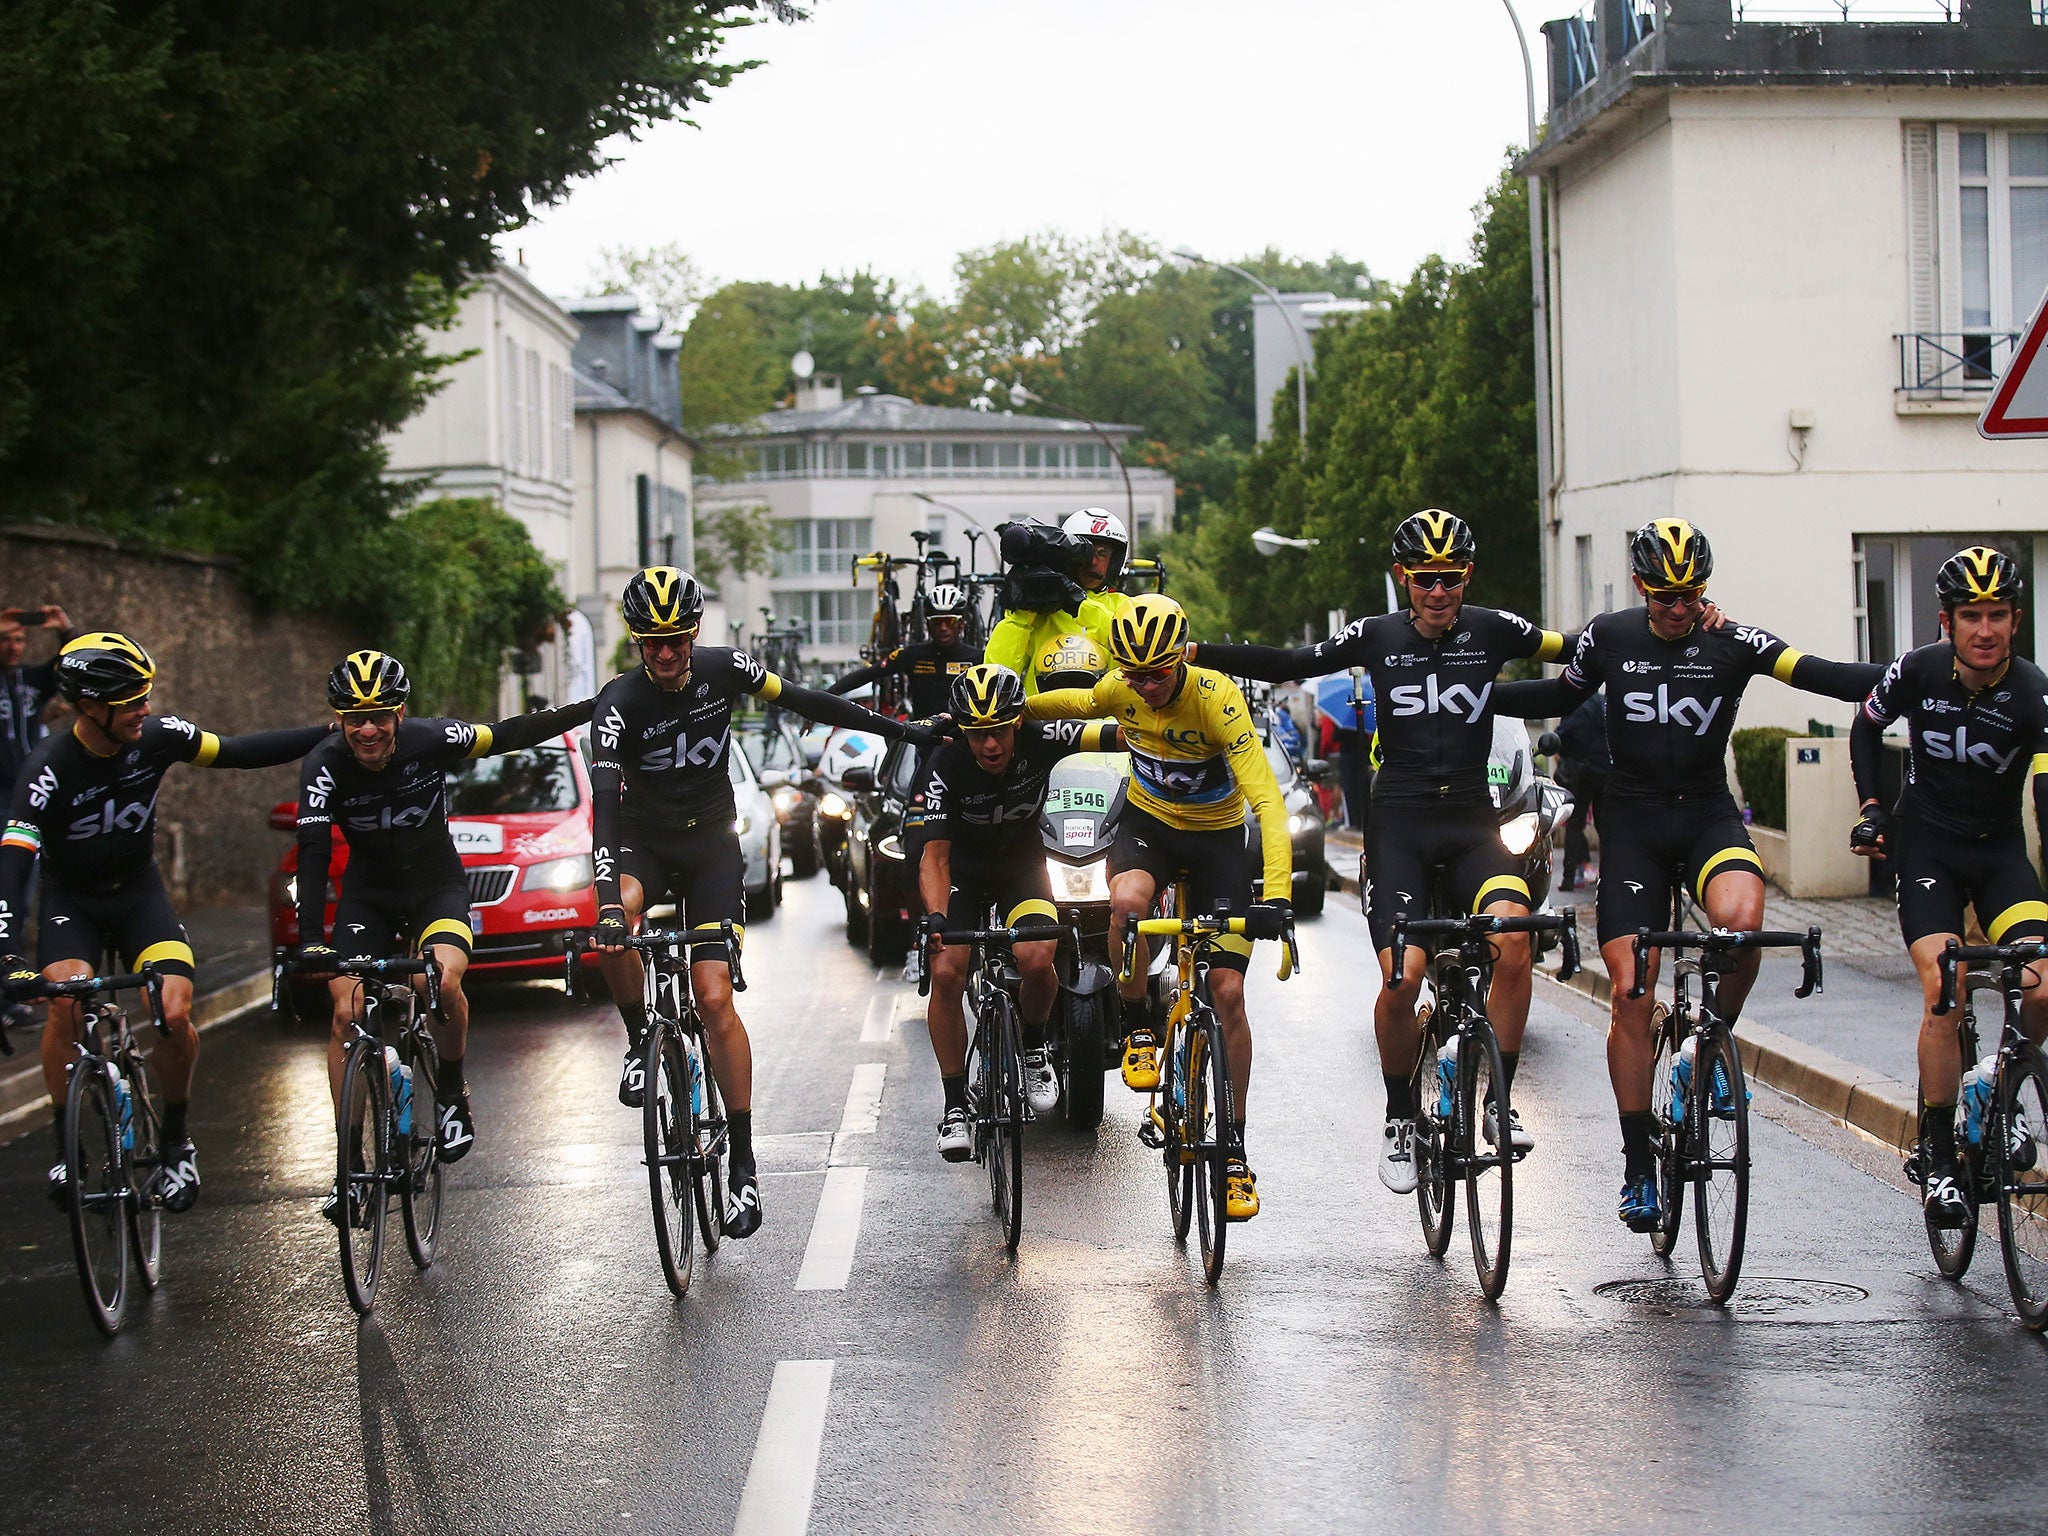 Chris Froome rides into Paris with the rest of Team Sky